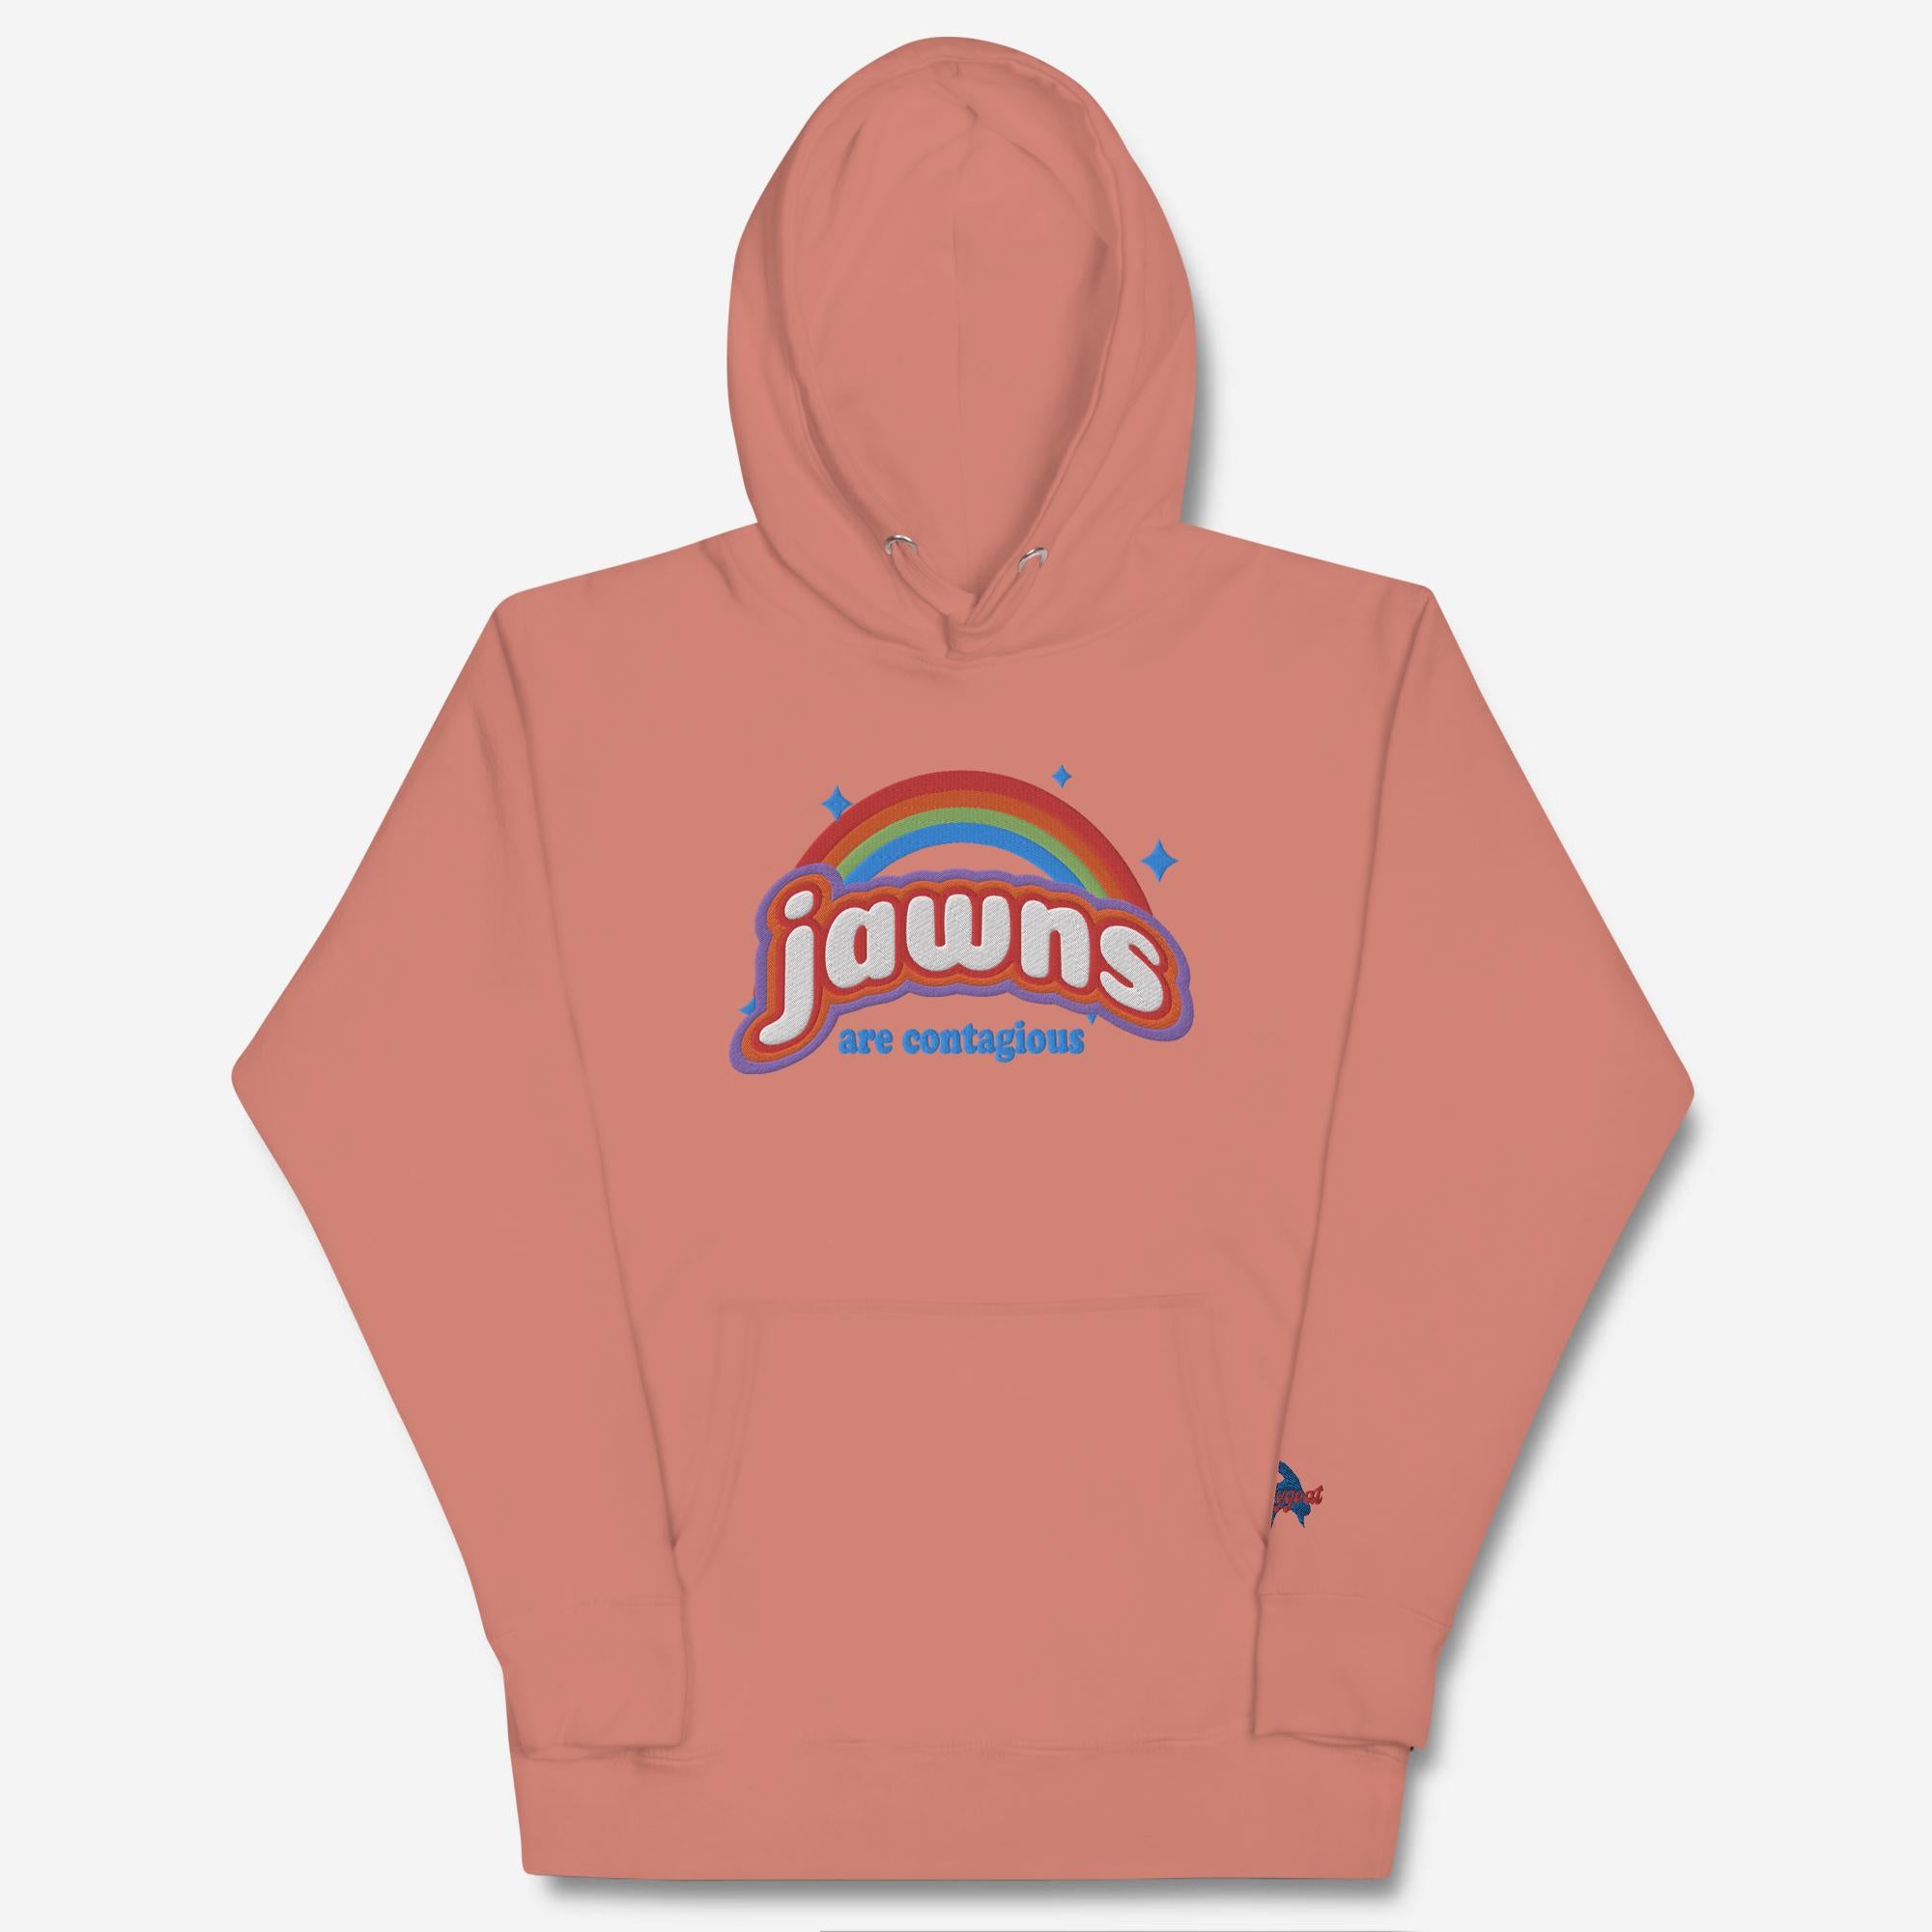 "Jawns Are Contagious" Embroidered Hoodie